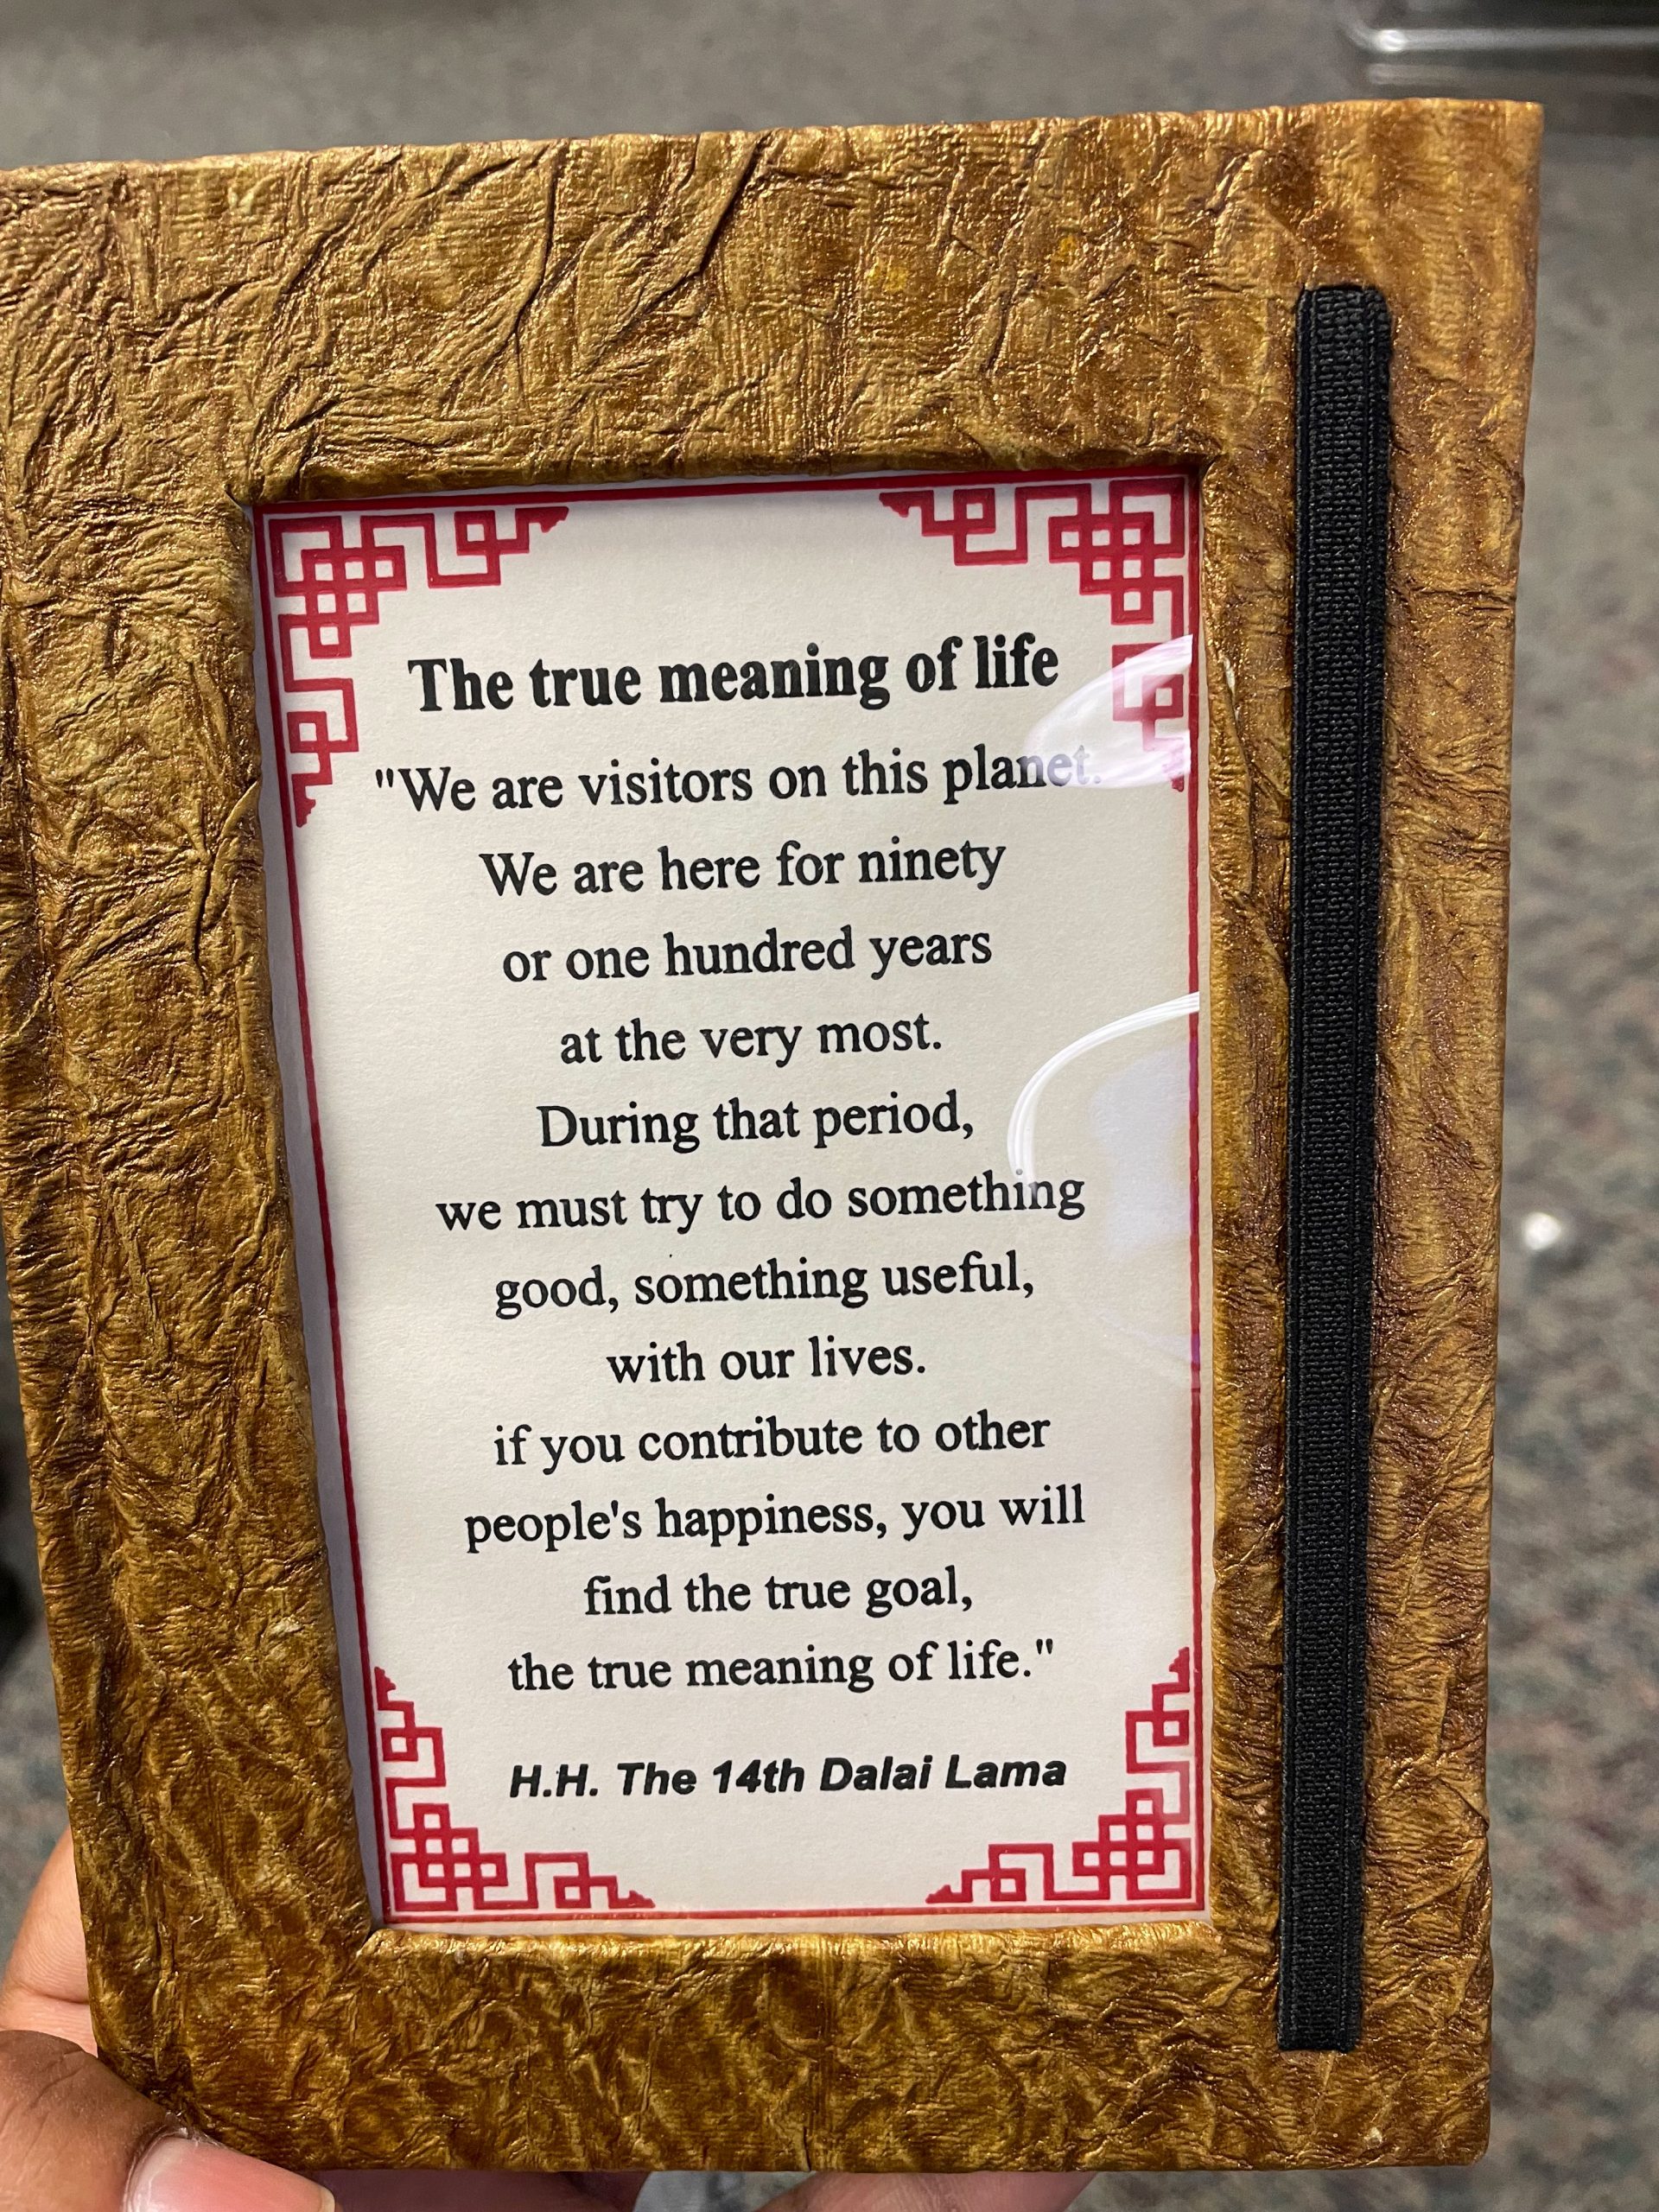 PHOTO: Image shows a brown journal being held. On the cover is a quote by the Dalai Lama on the "True Meaning of Life." Photo by The Signal Managing Editor of Content & Operations Troylon Griffin II.